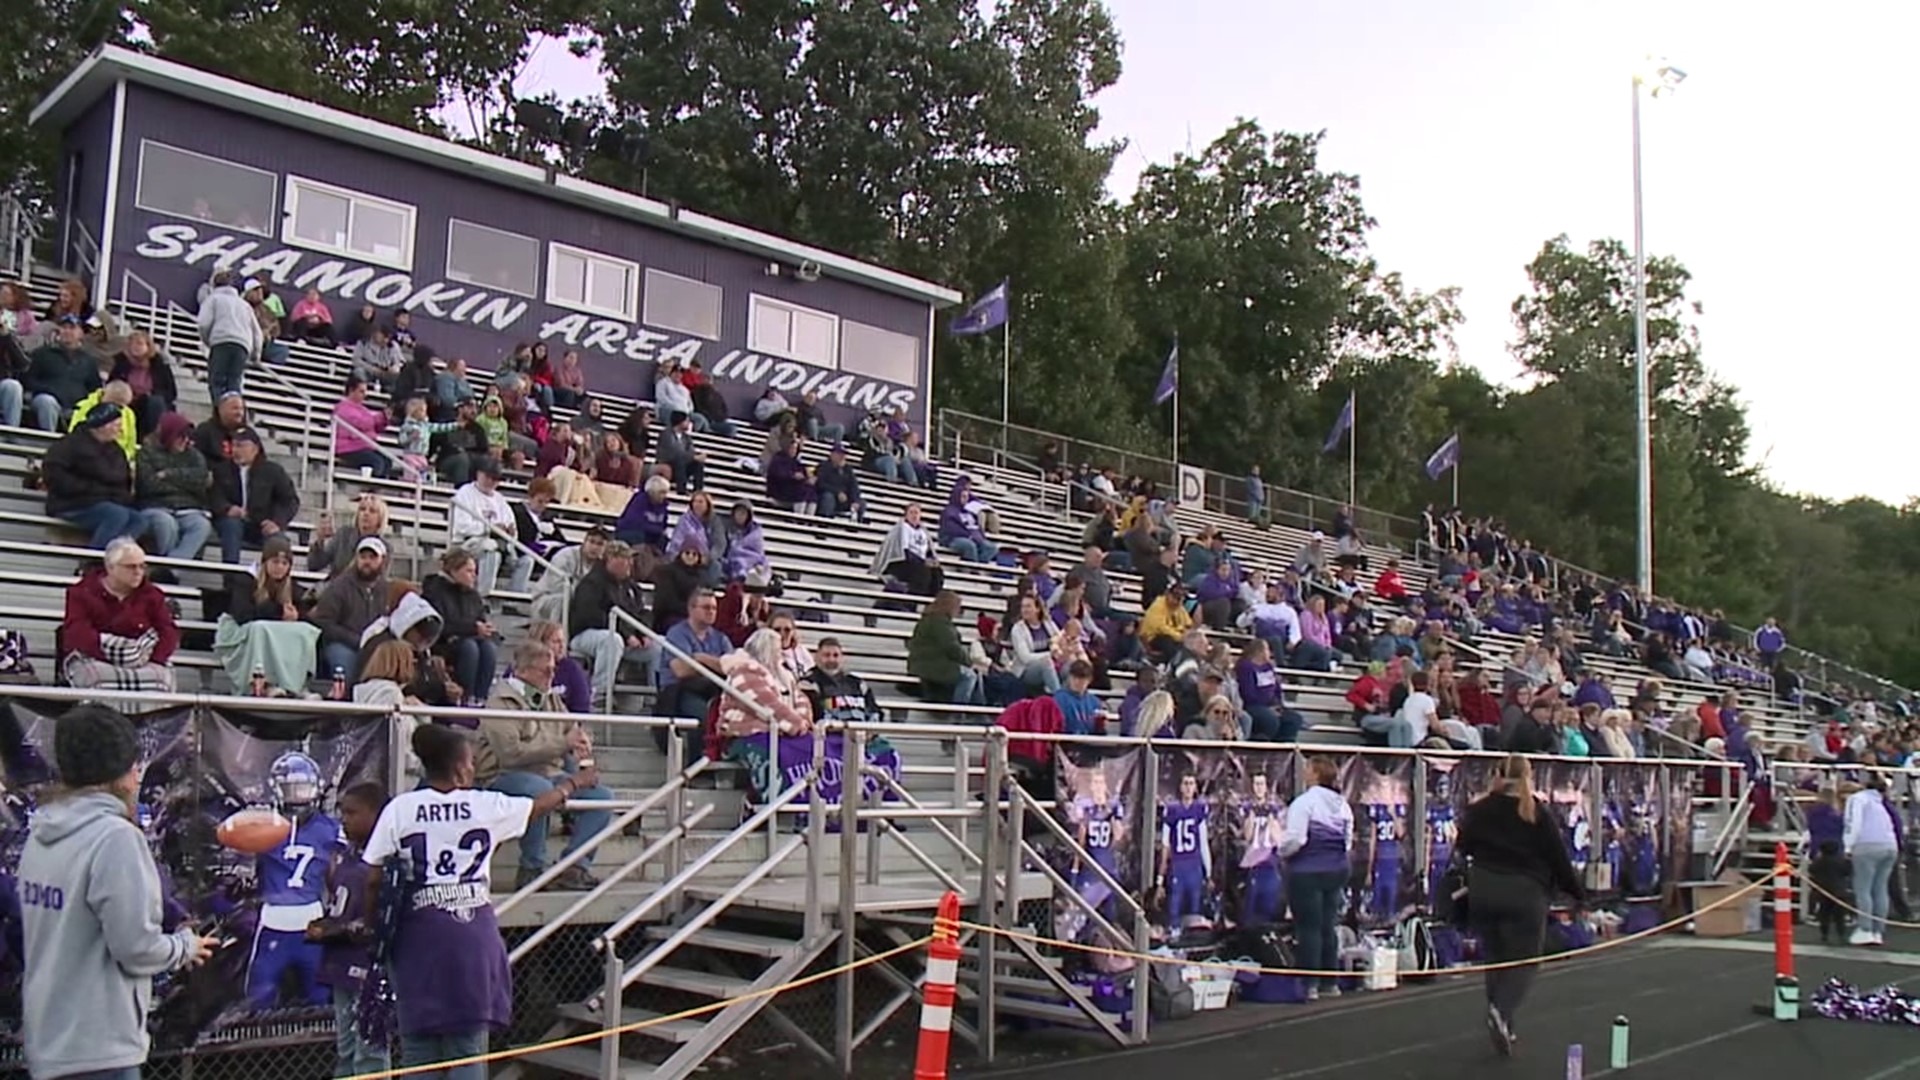 A new set of rules for fans in Shamokin; if you come to the game, you have to stay in your seat.